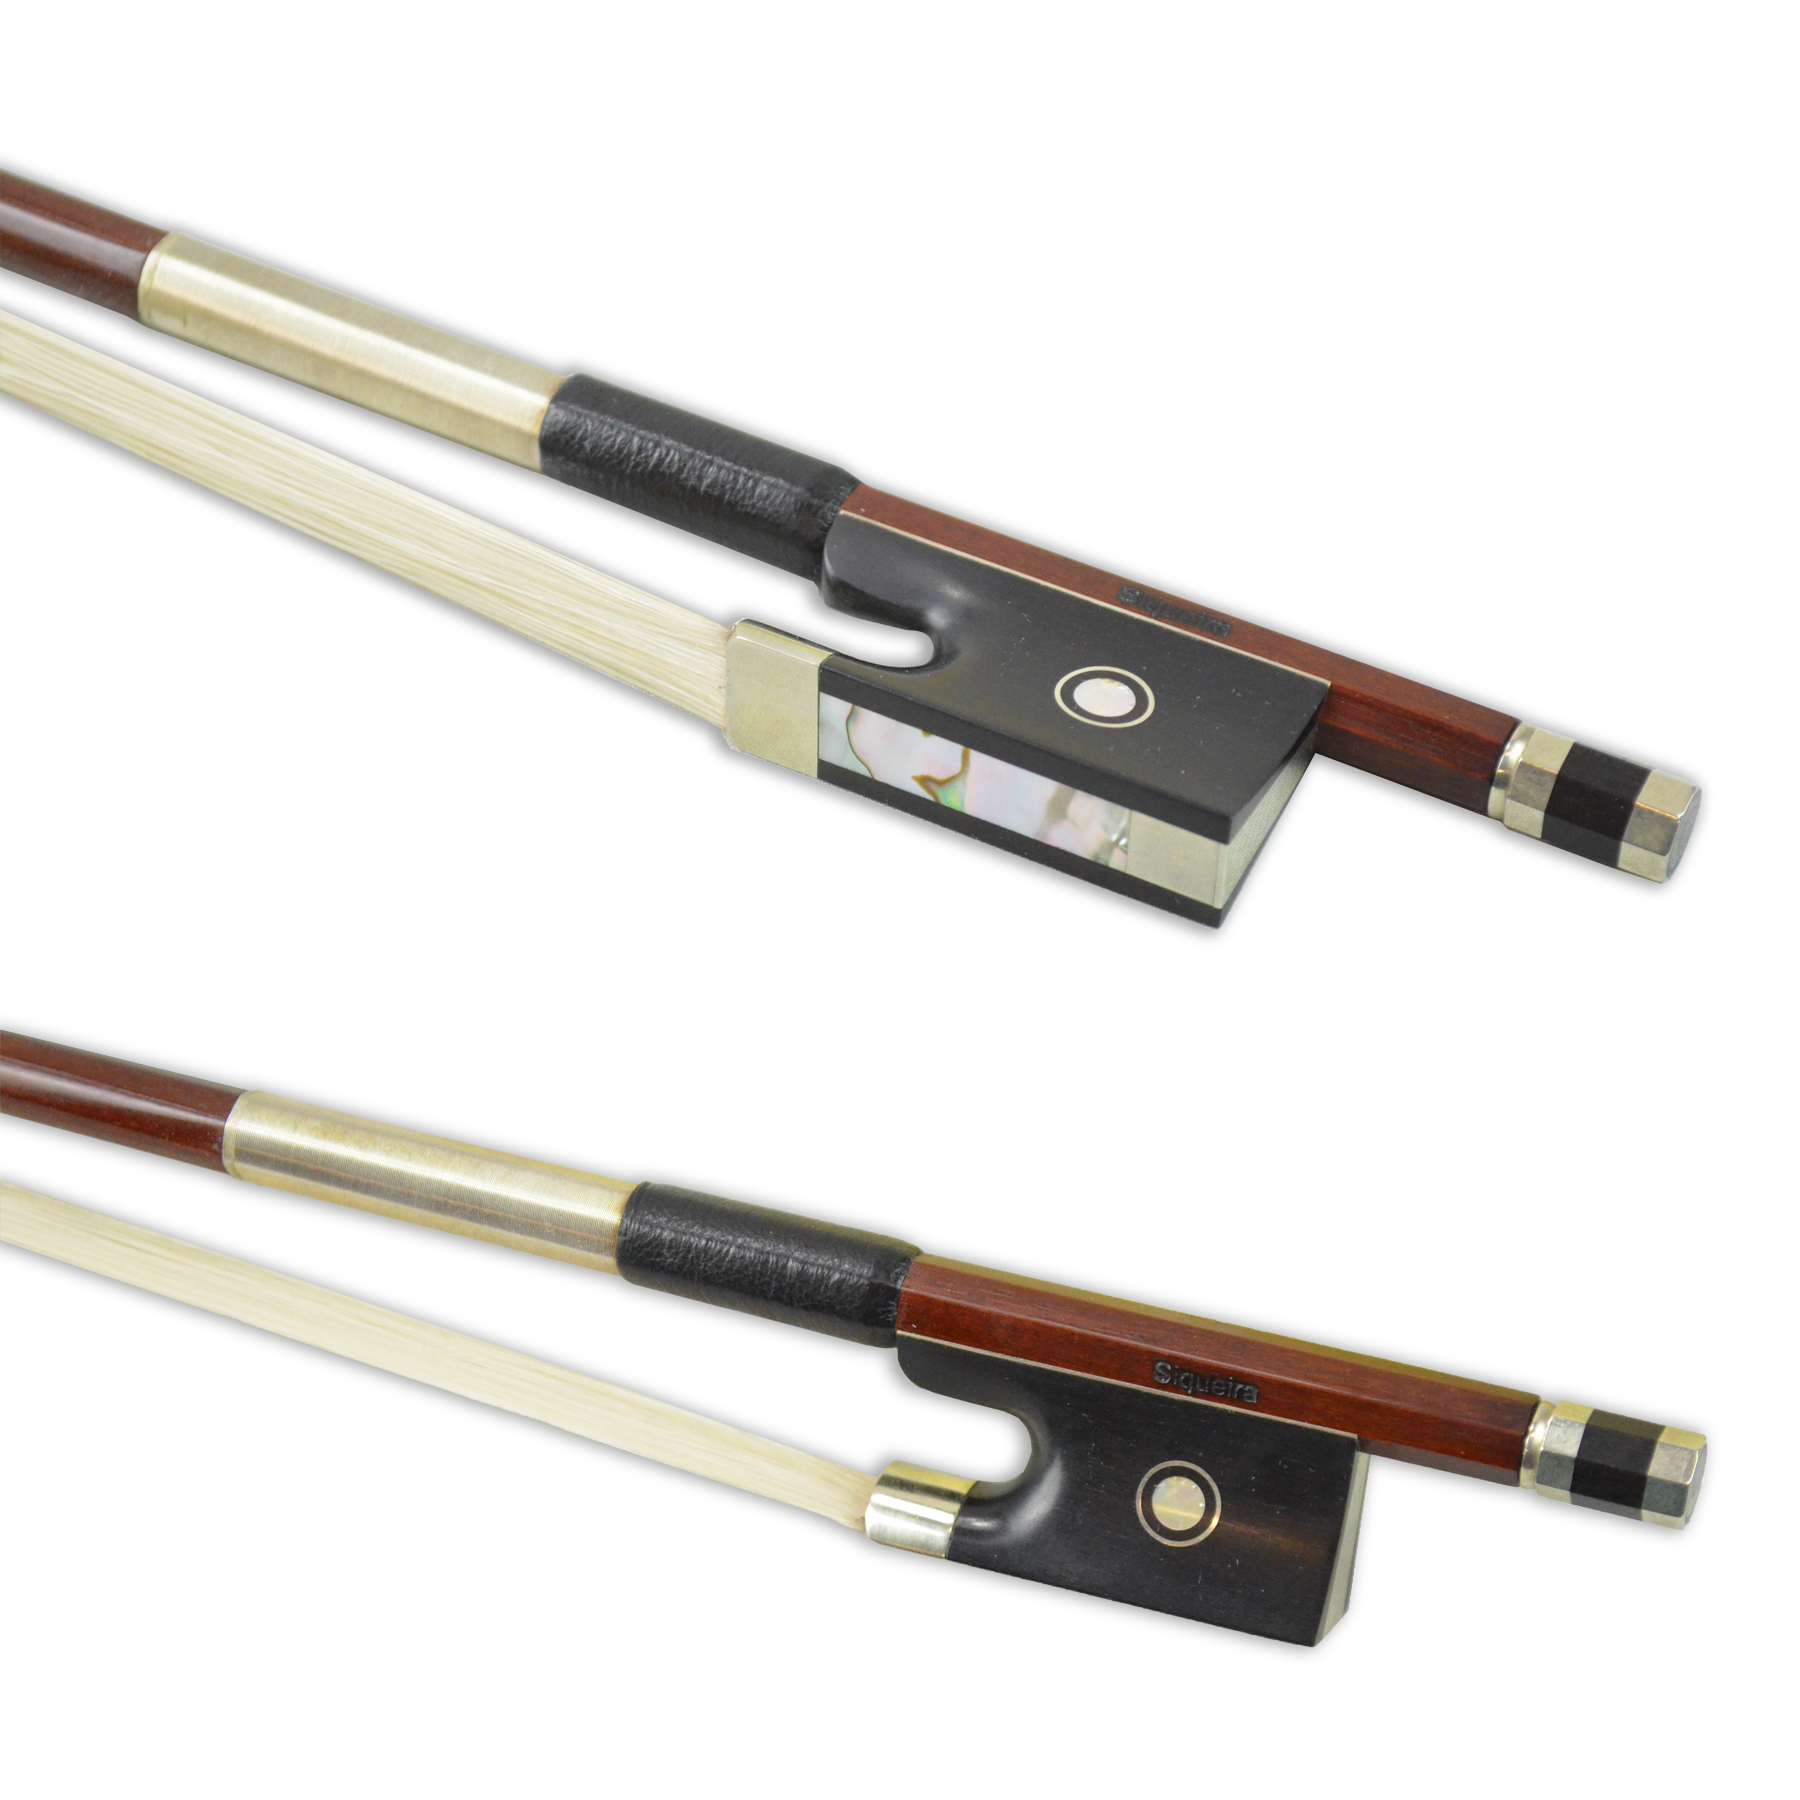 L'archet Brasil Nickel Fully-Mounted Violin Bows in action